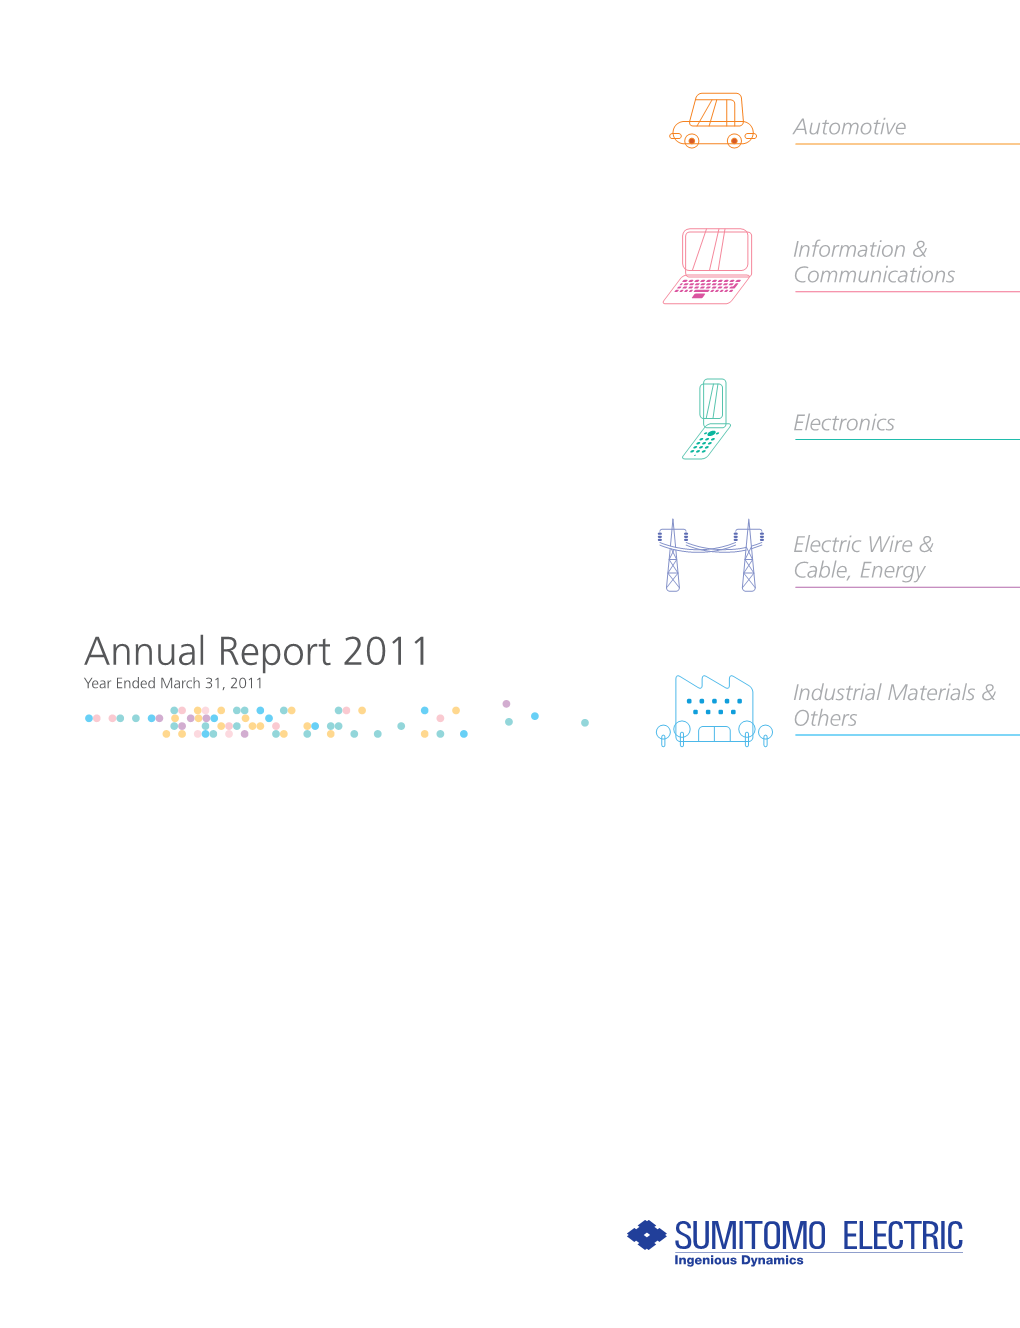 Annual Report 2011Communications & Cable, Energy & Others Year Ended March 31, 2011 Industrial Materials & Others